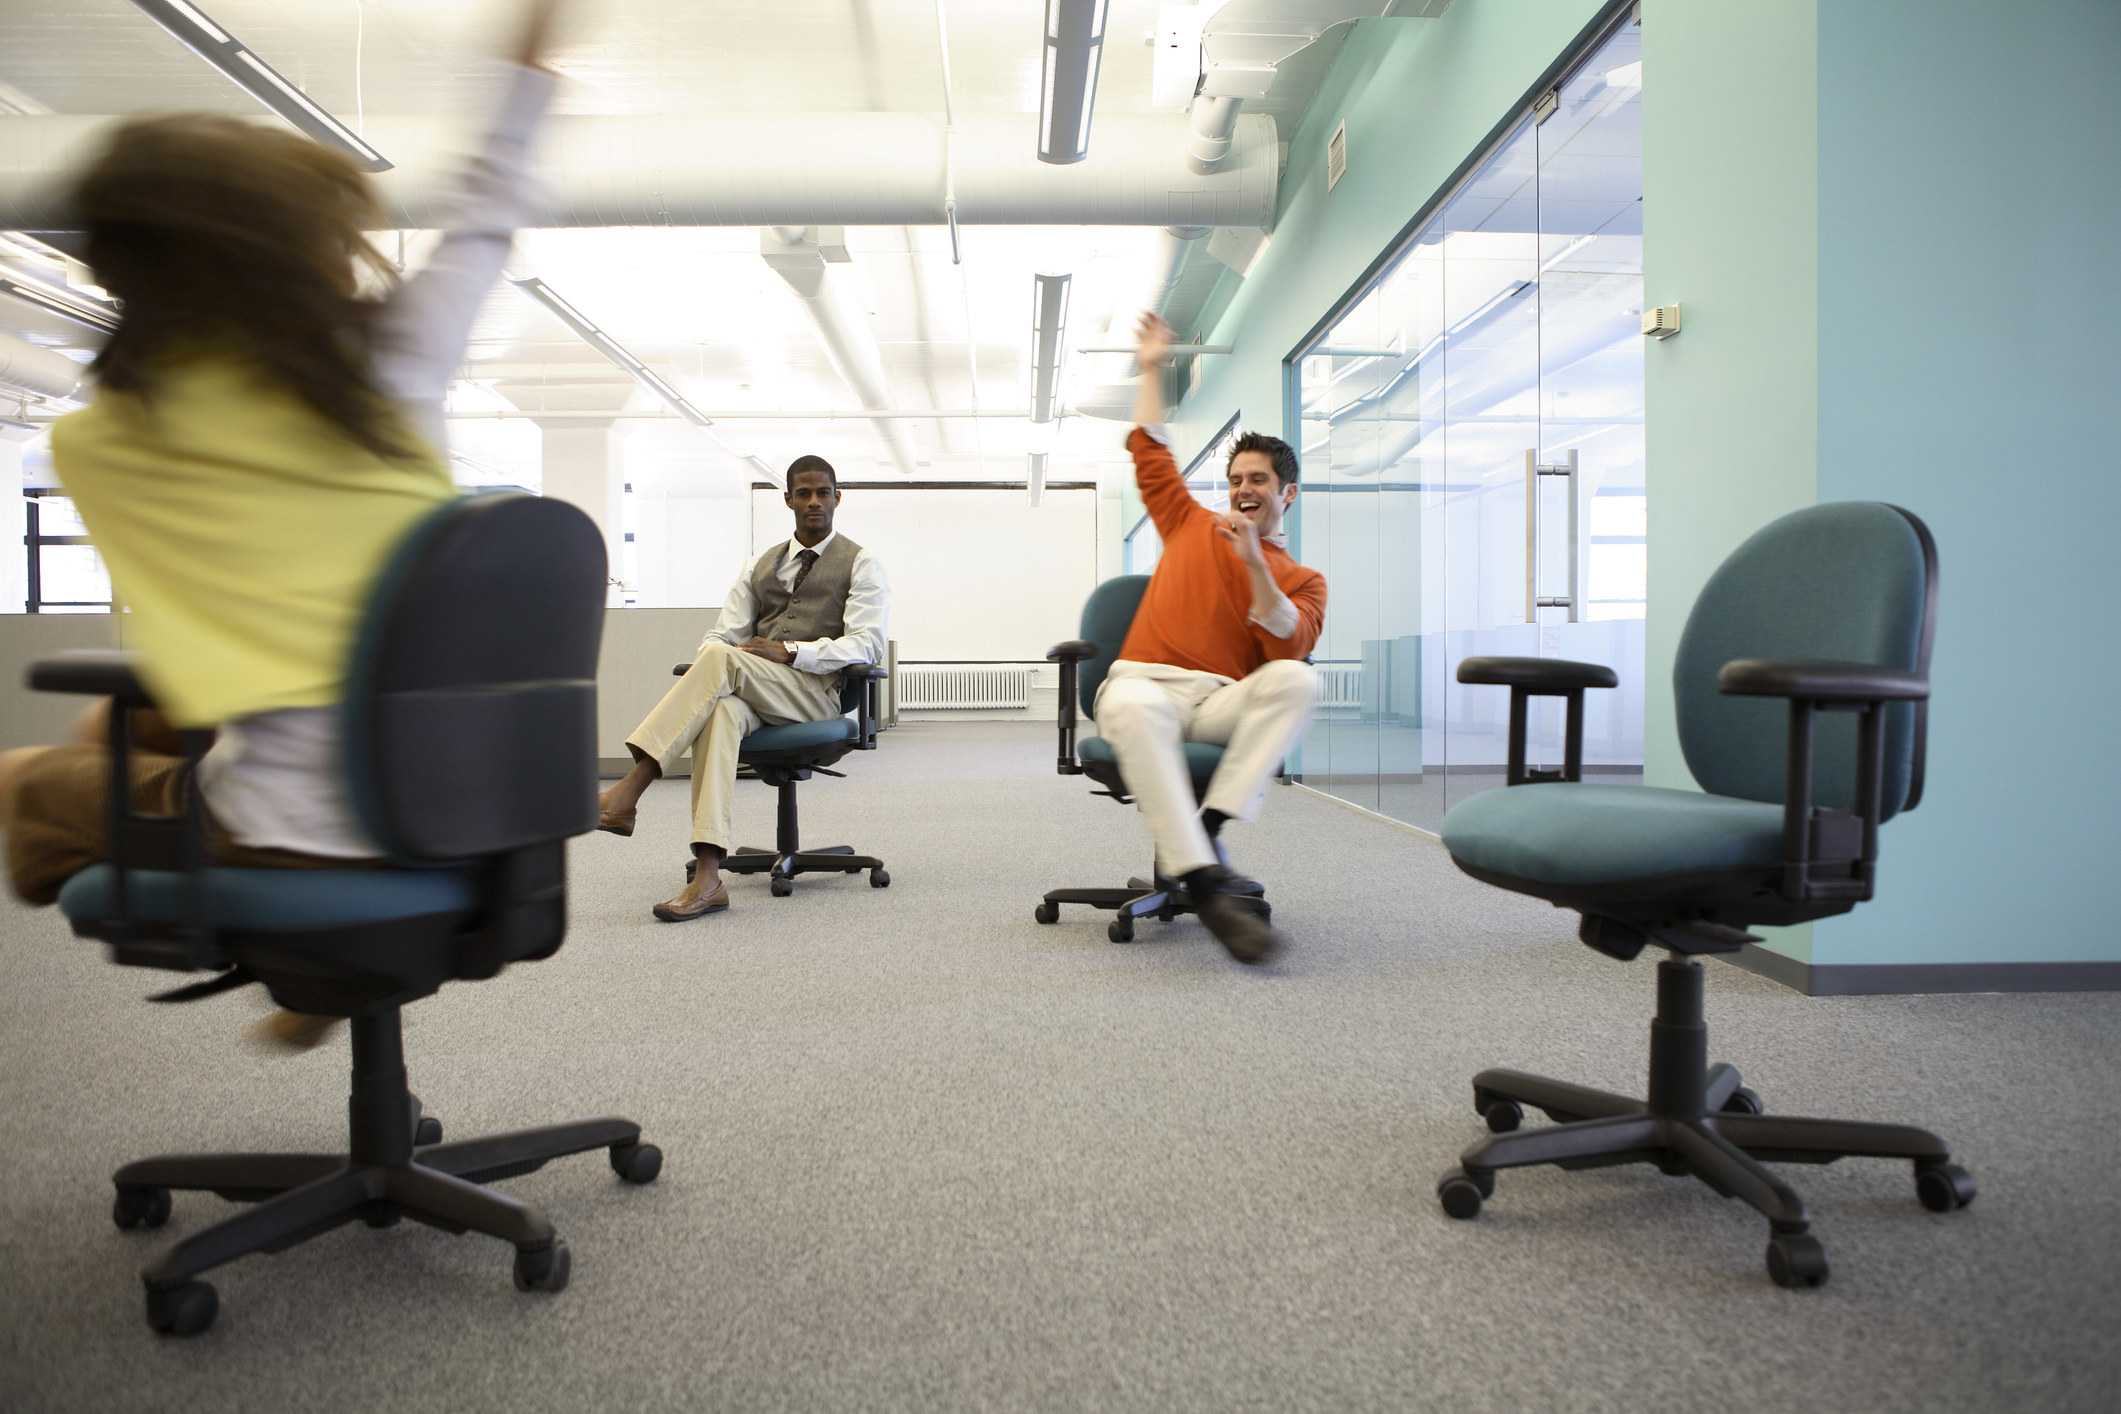 Office workers spinning on chairs